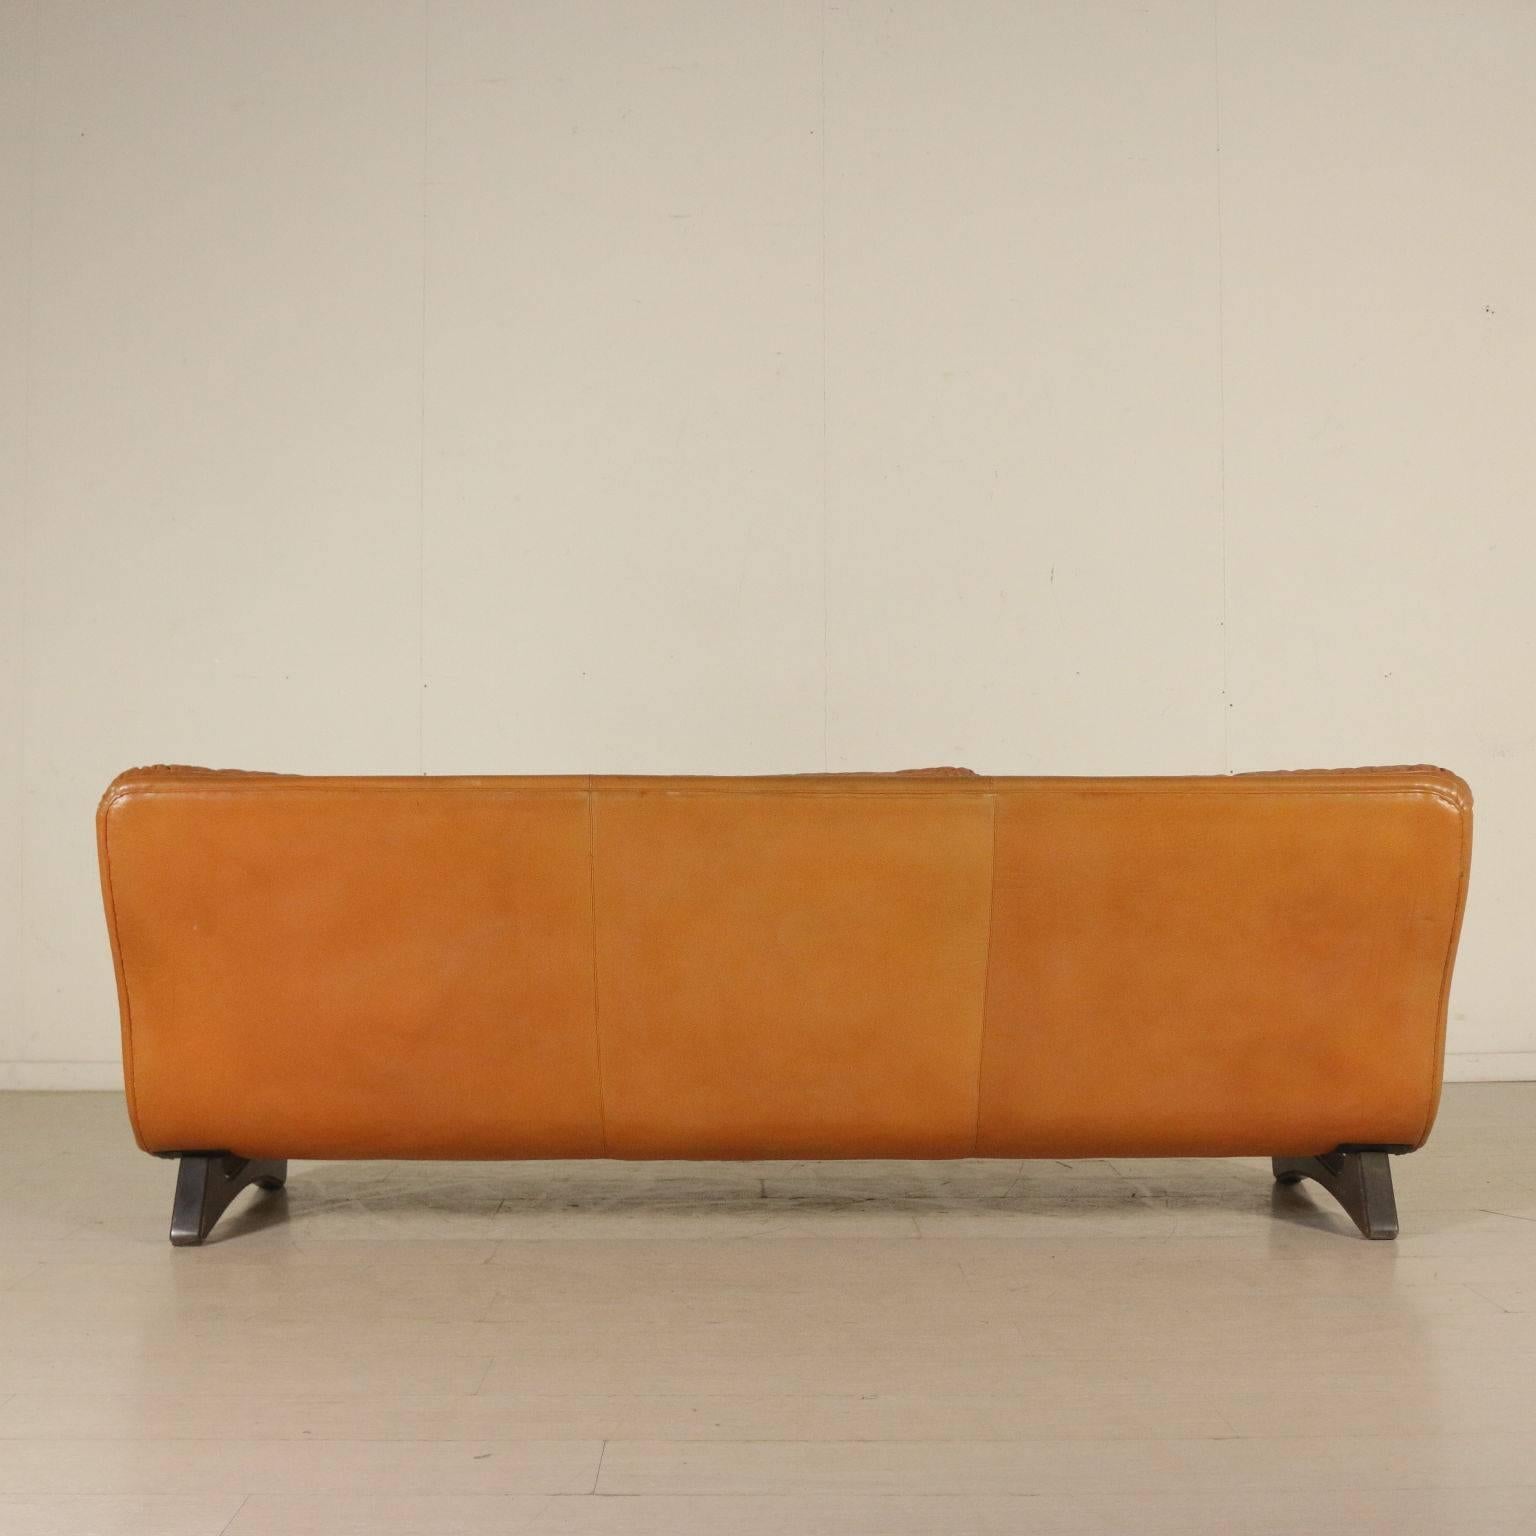 Mid-20th Century Sofa Foam Padding Leather Upholstery Vintage, Italy, 1960s